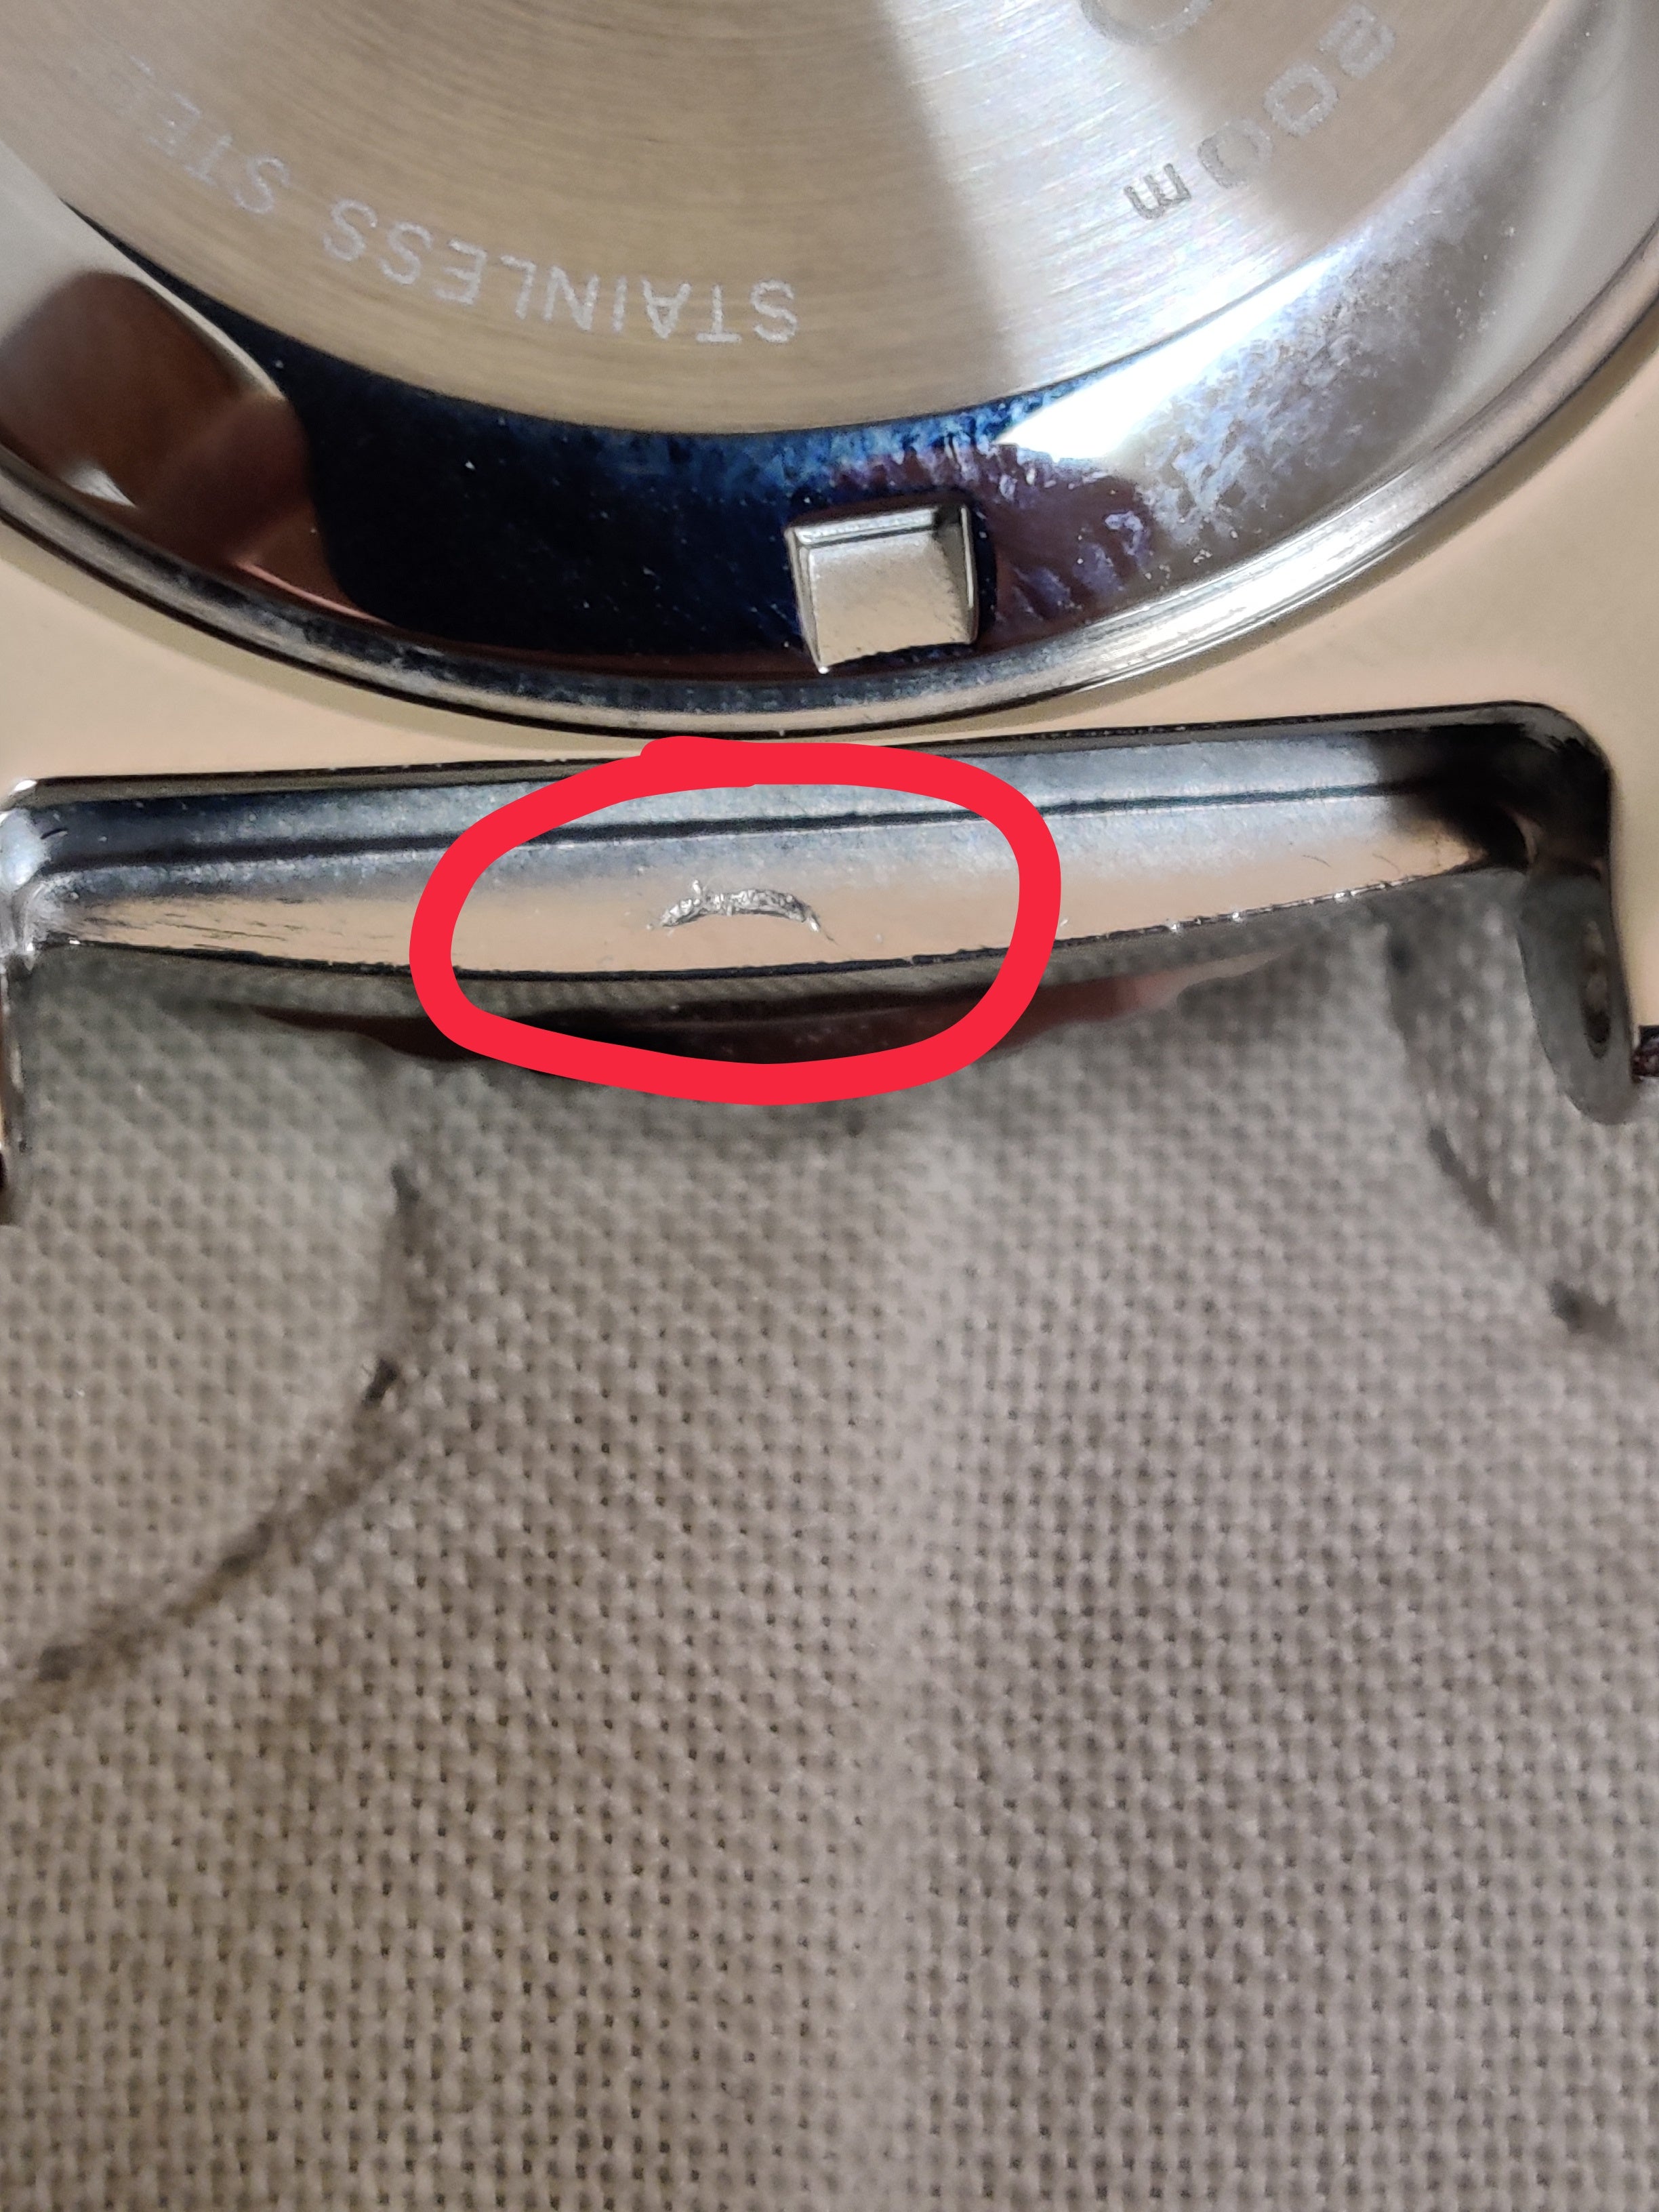 Seiko Turtle Quality Control Issues | WatchUSeek Watch Forums